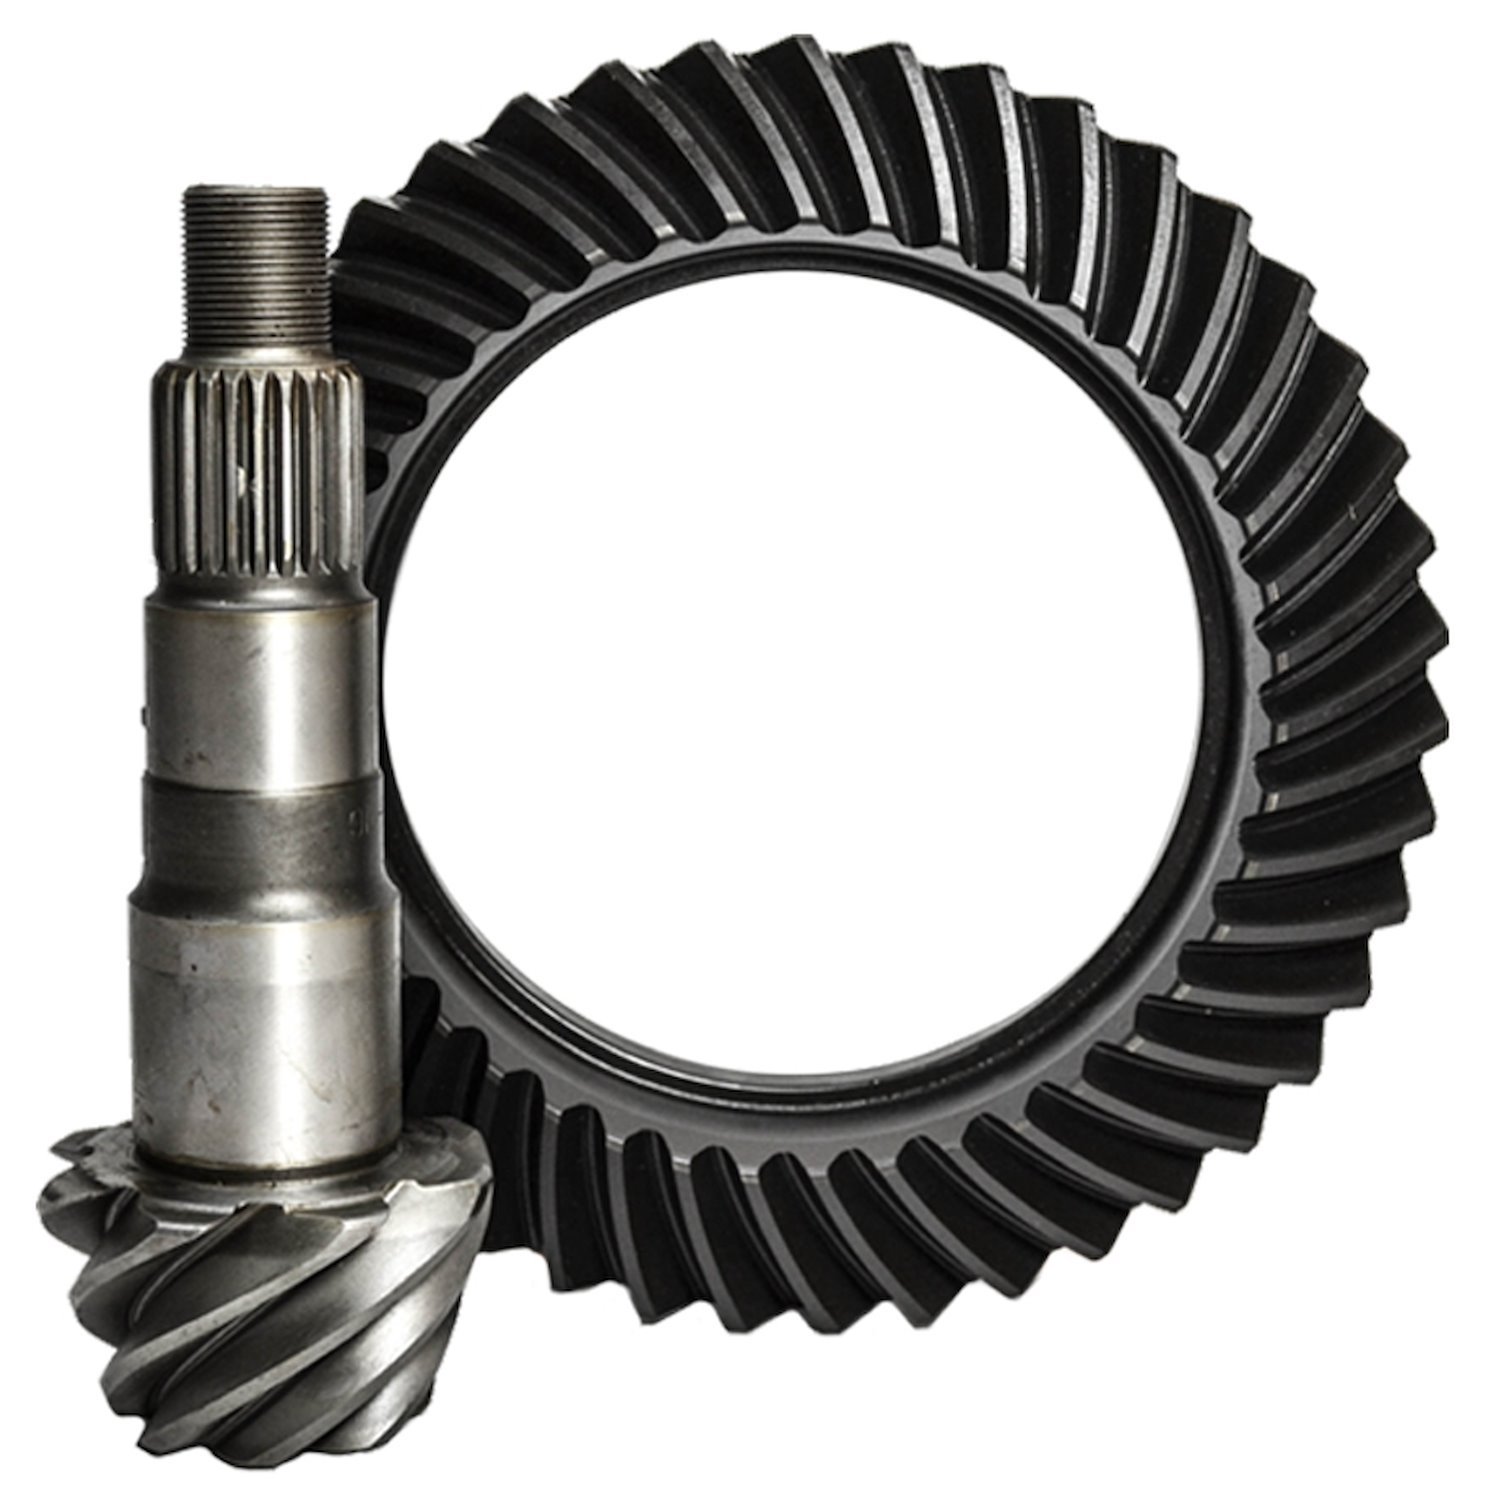 D44RS-538-NG Dana 44RS 5.38 Ratio Reverse Short Ring And Pinion for 2007-2018 Jeep Wrangler JK Rubicon & Rubicon Unlimited